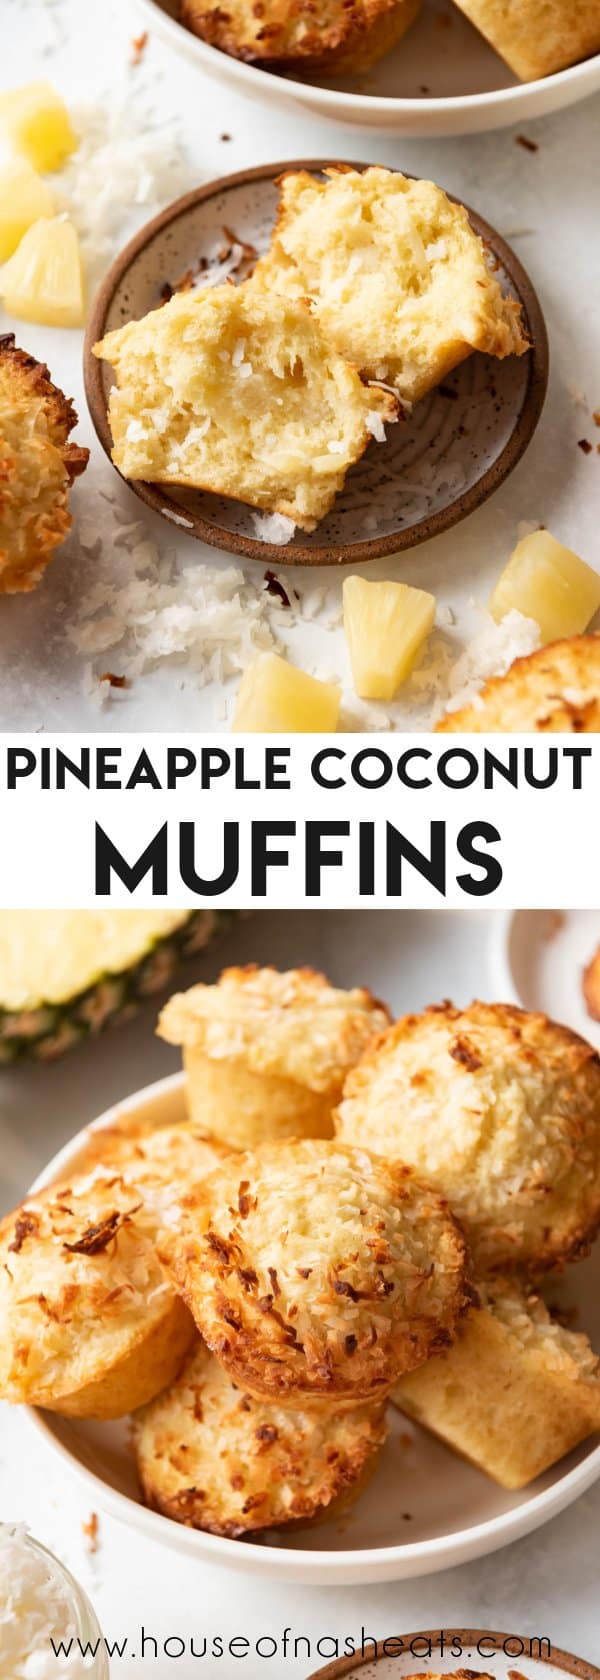 A collage of pineapple coconut muffins with text overlay.